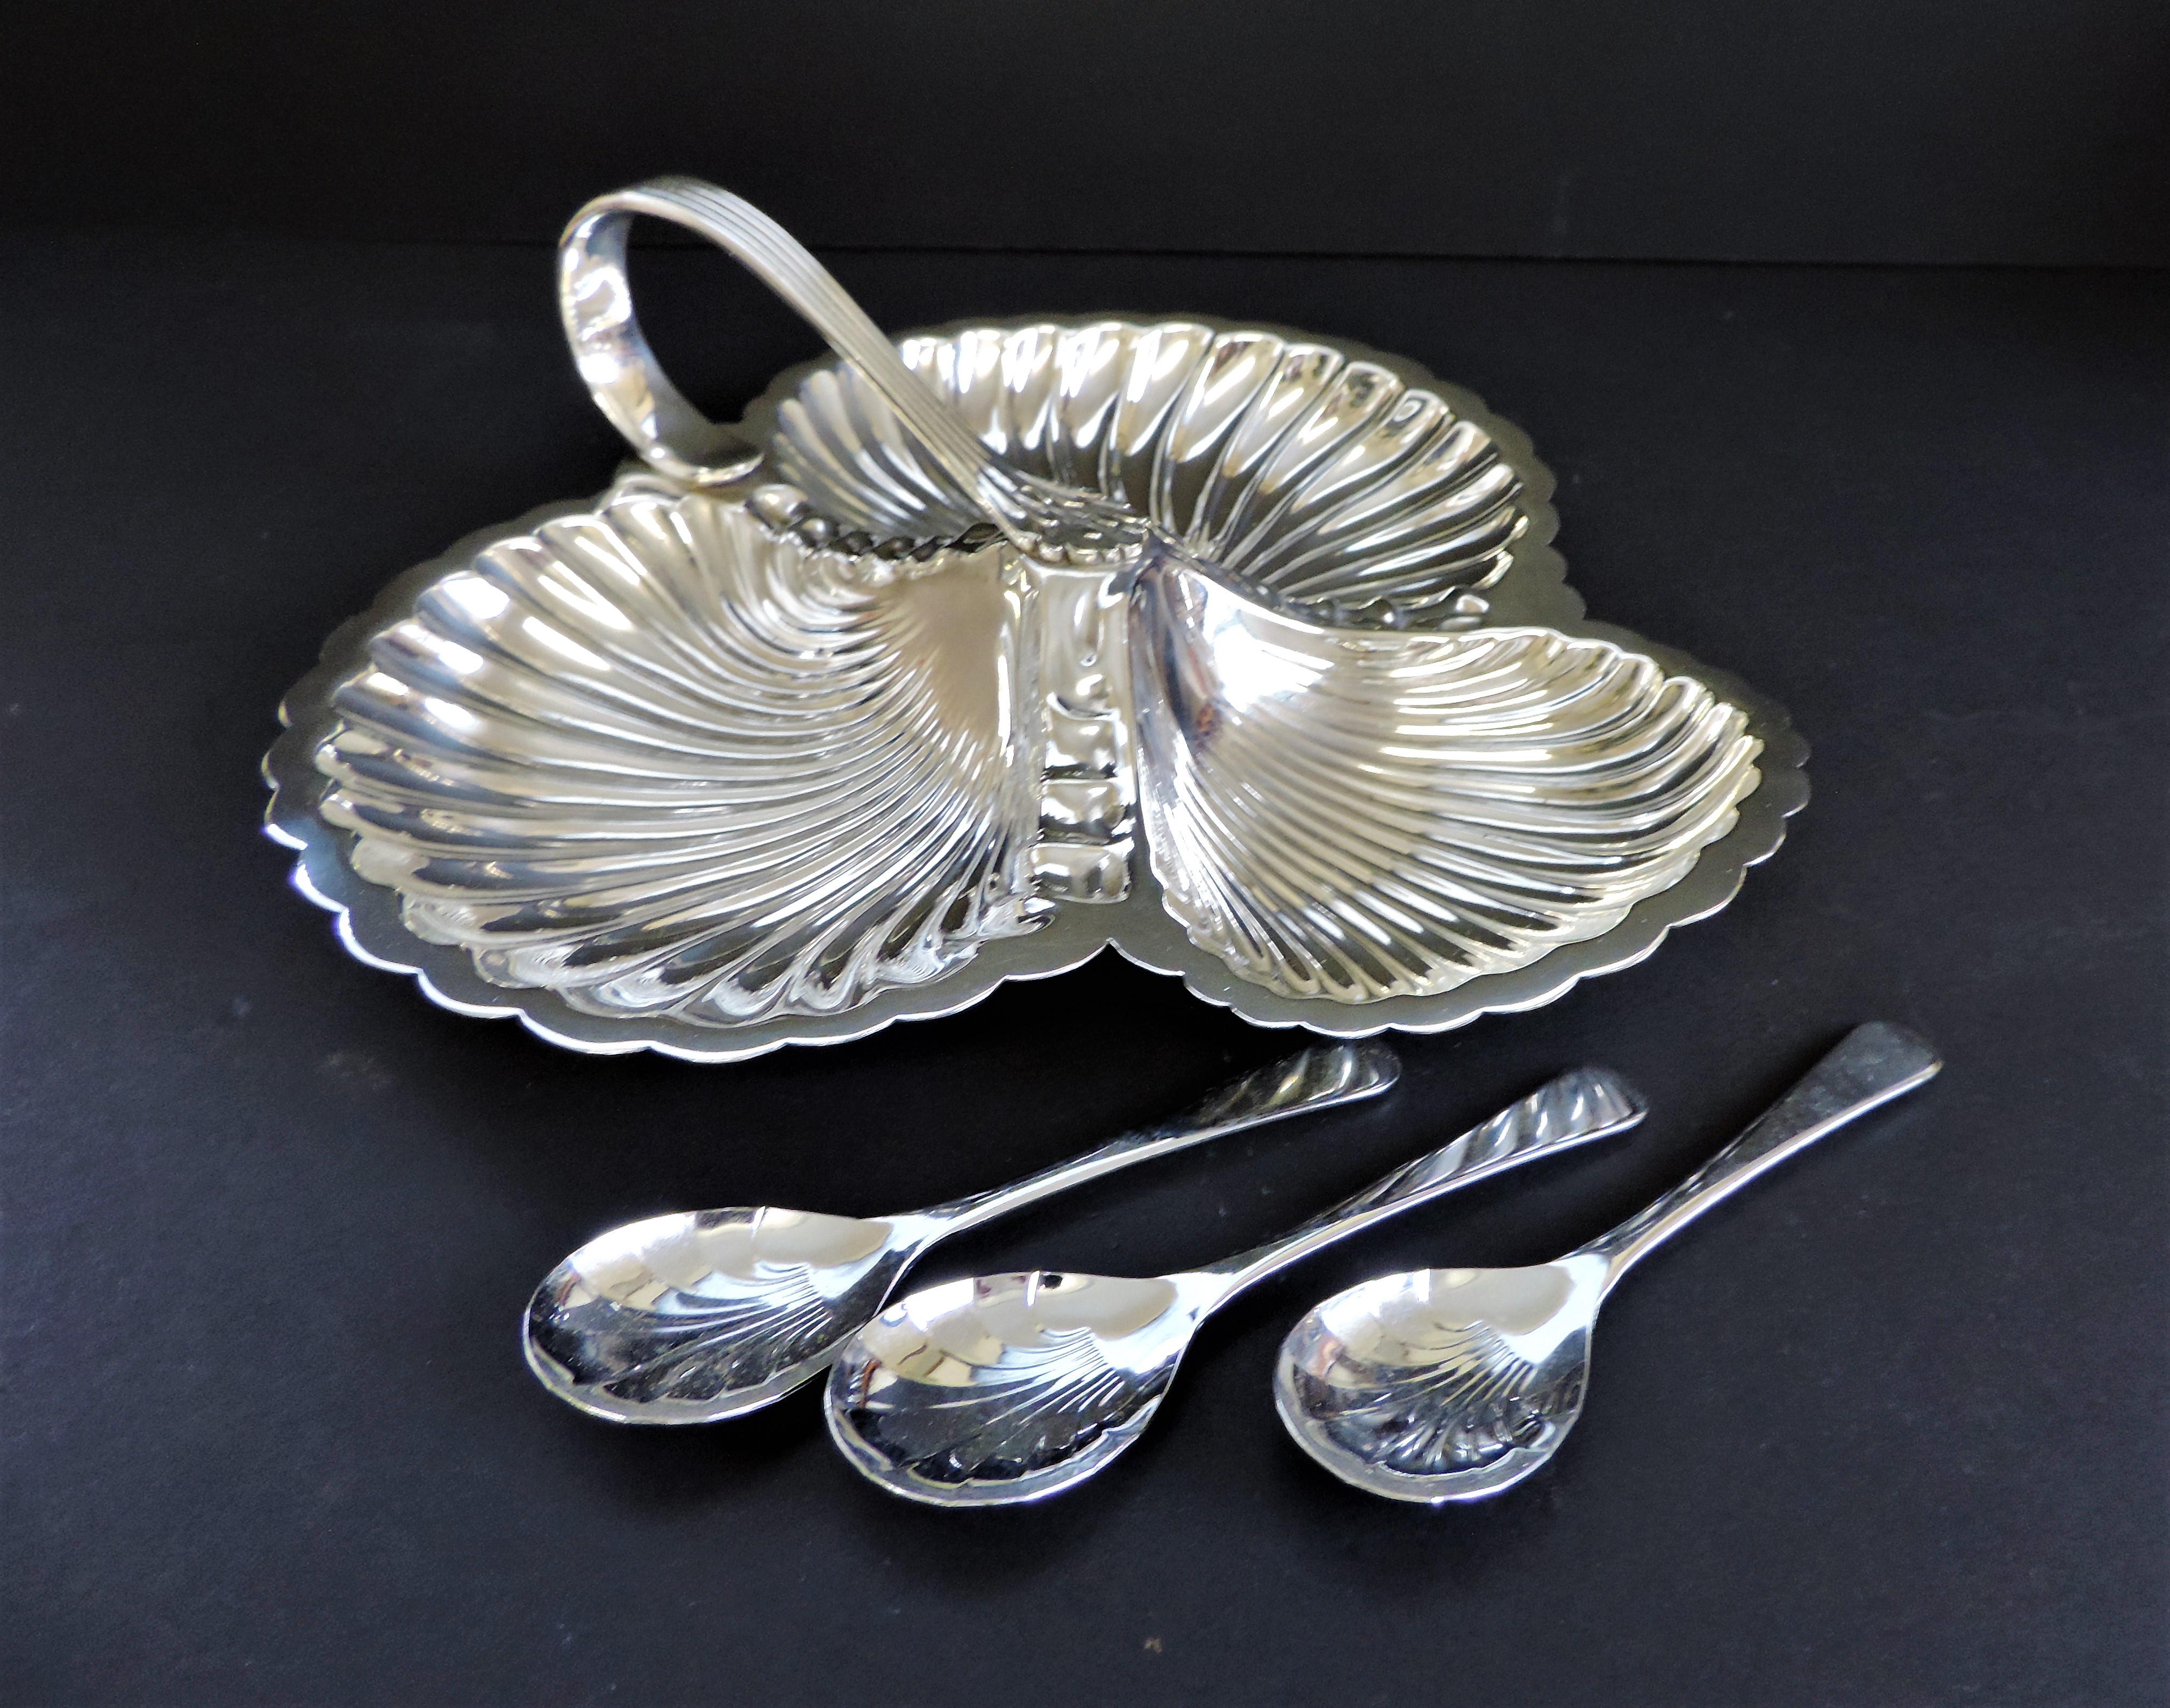 Antique Art Nouveau Silver Plated Hors D'oeuvre/Condiments Tray - Image 3 of 6